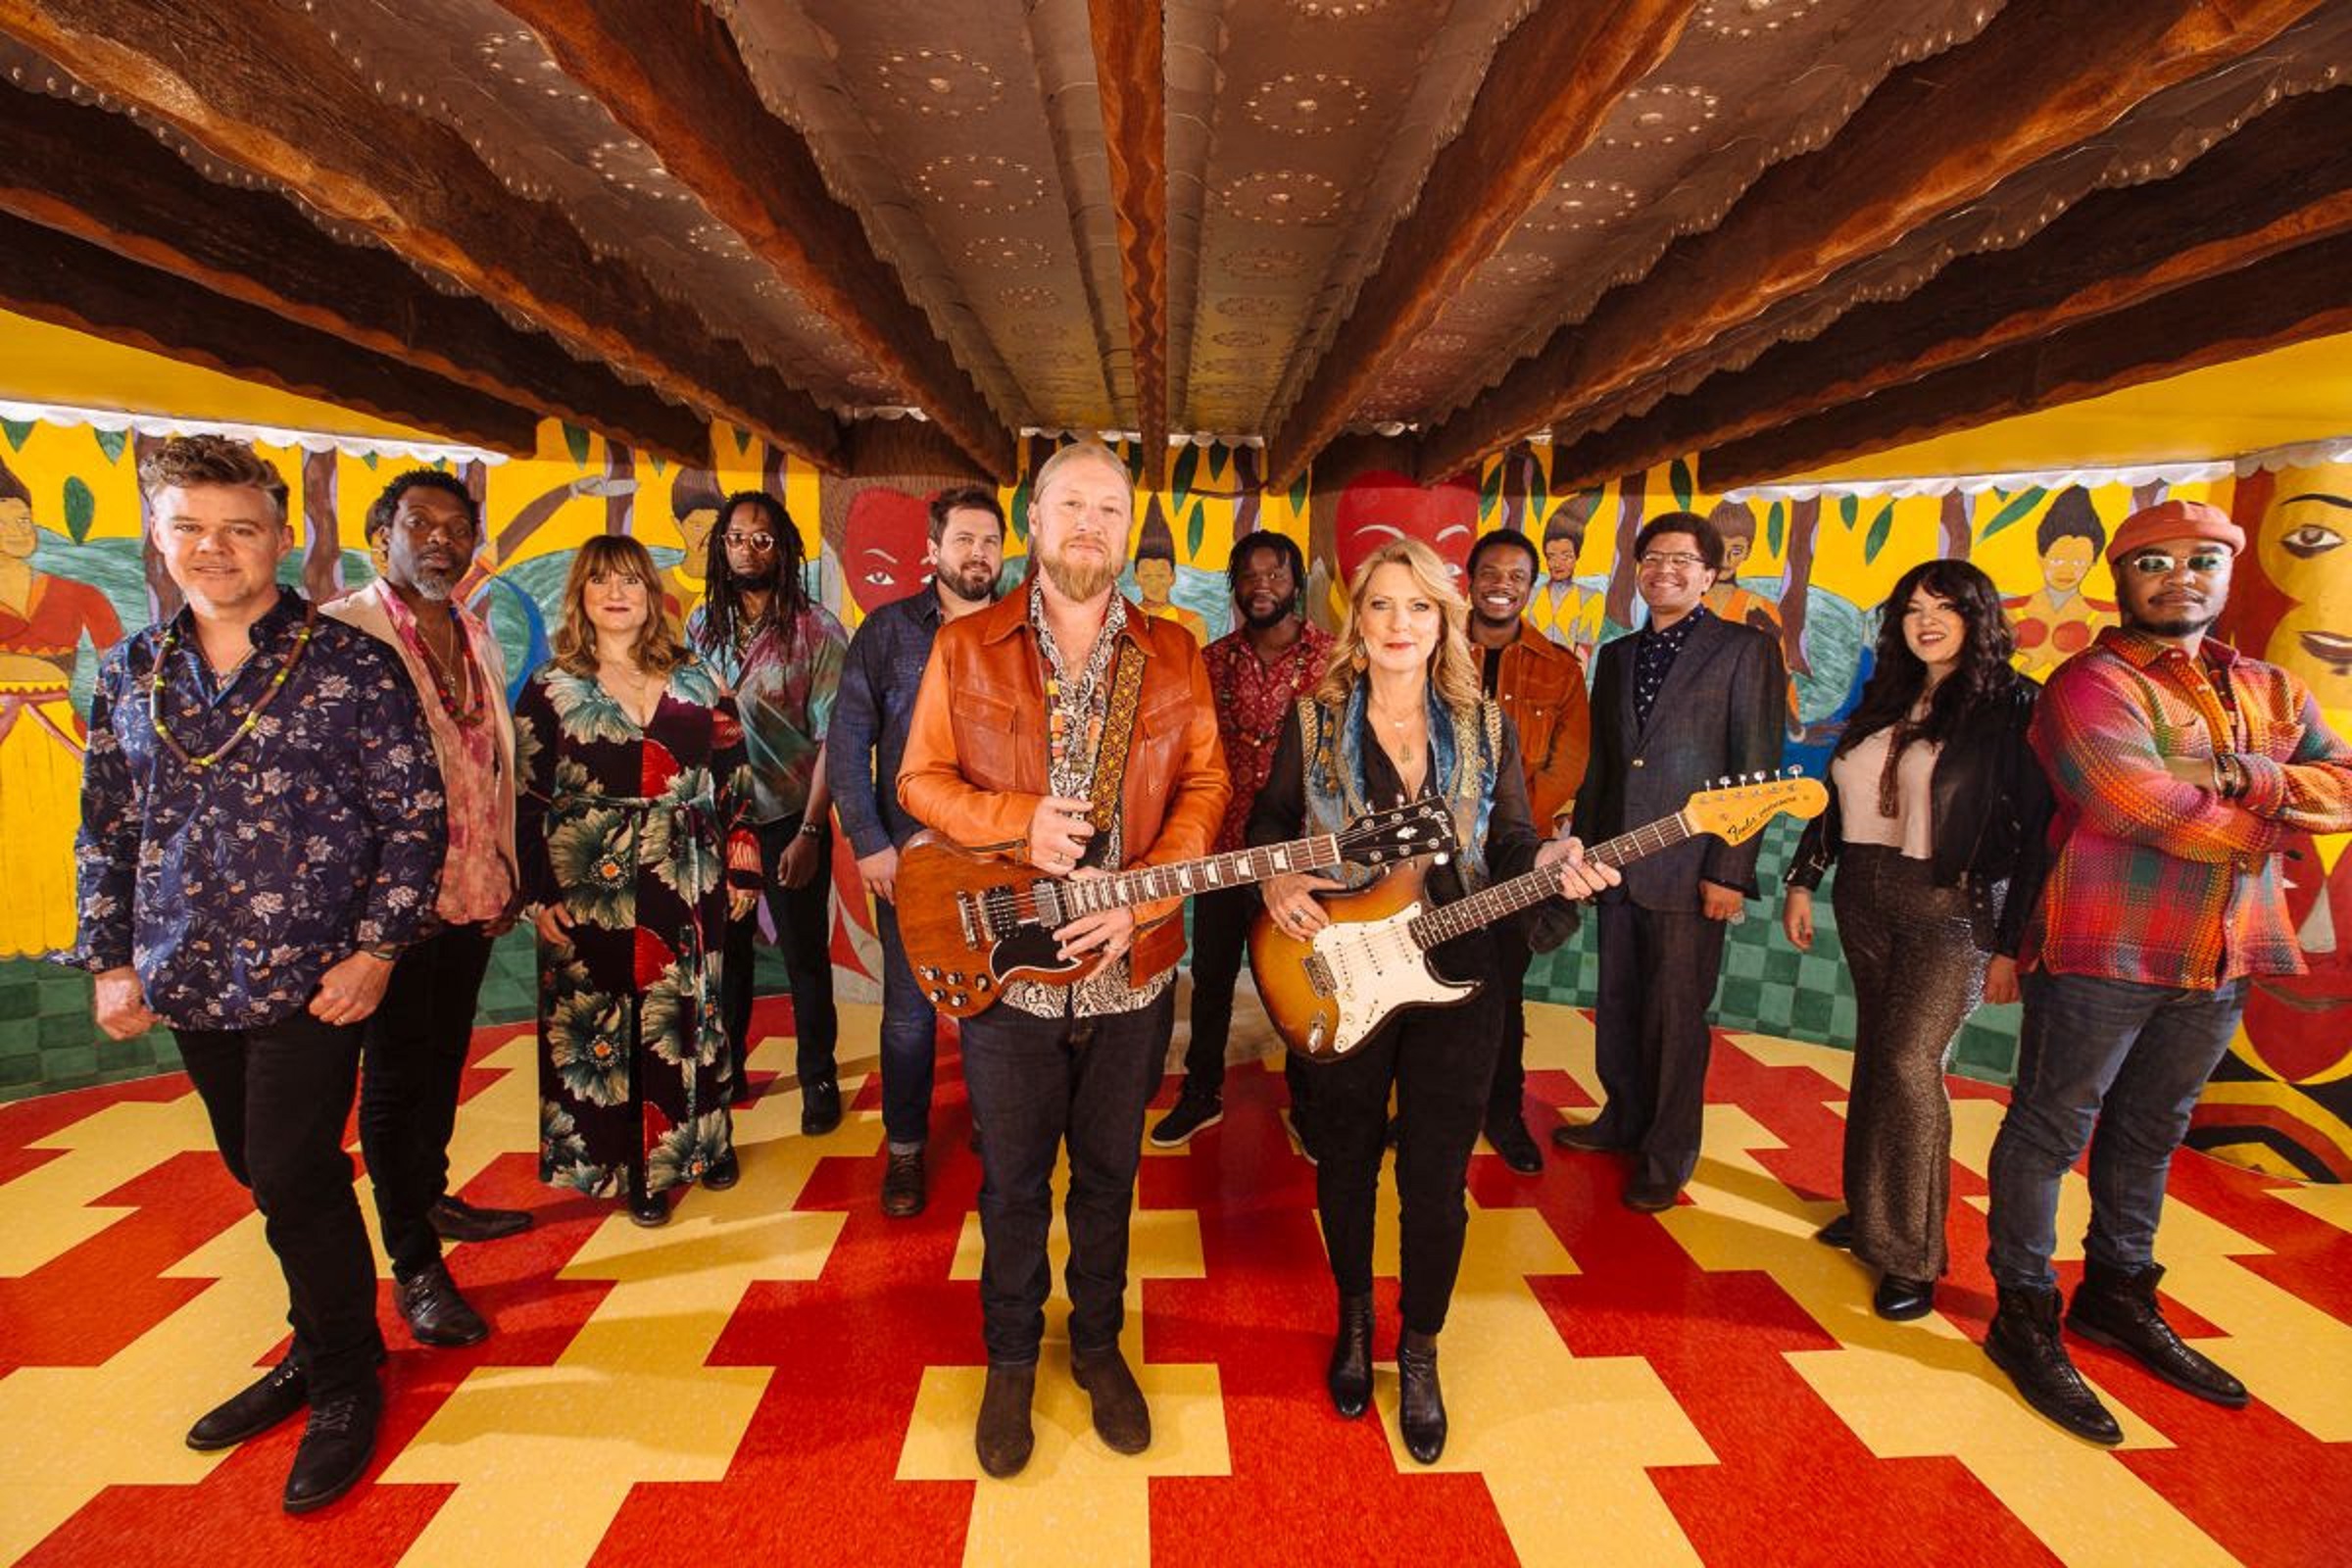 TEDESCHI TRUCKS BAND RELEASES SECOND (of 4) ALBUMS: I AM THE MOON: ASCENSION